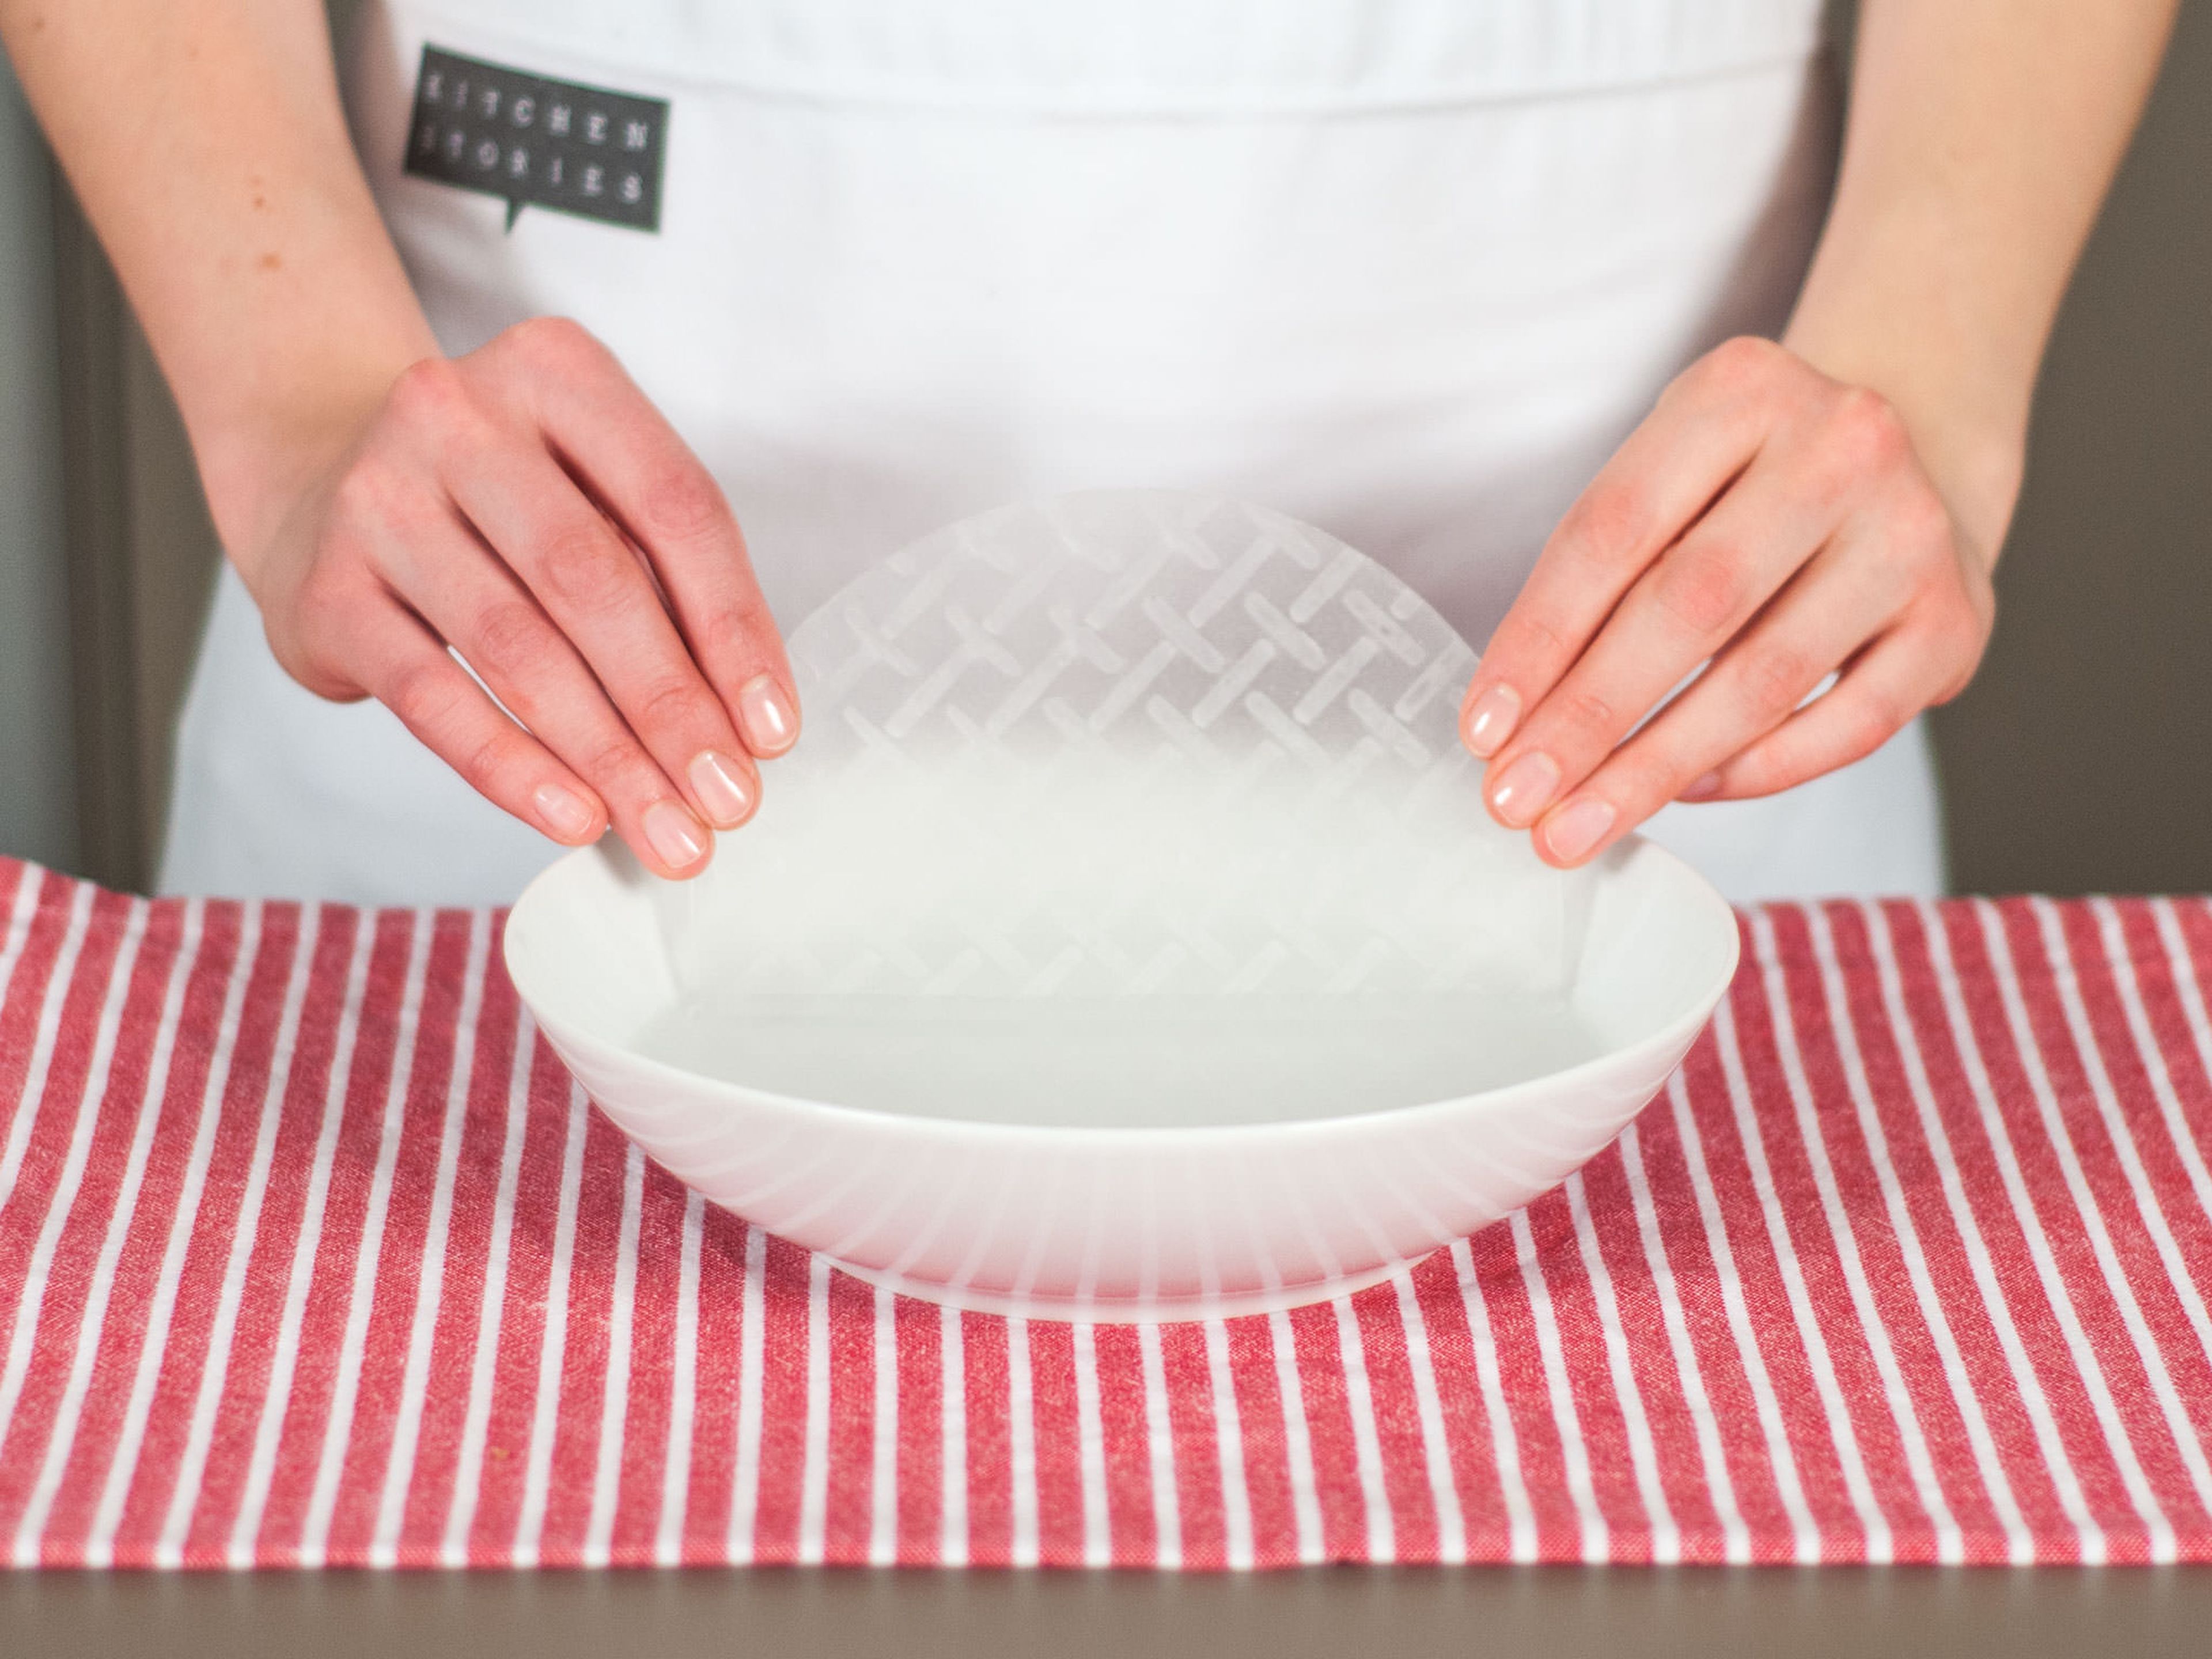 Dip rice wrappers evenly into water and allow to soak for approx. 1 min. 
Gently shake to remove excess water. Set aside on a plate or cutting board.